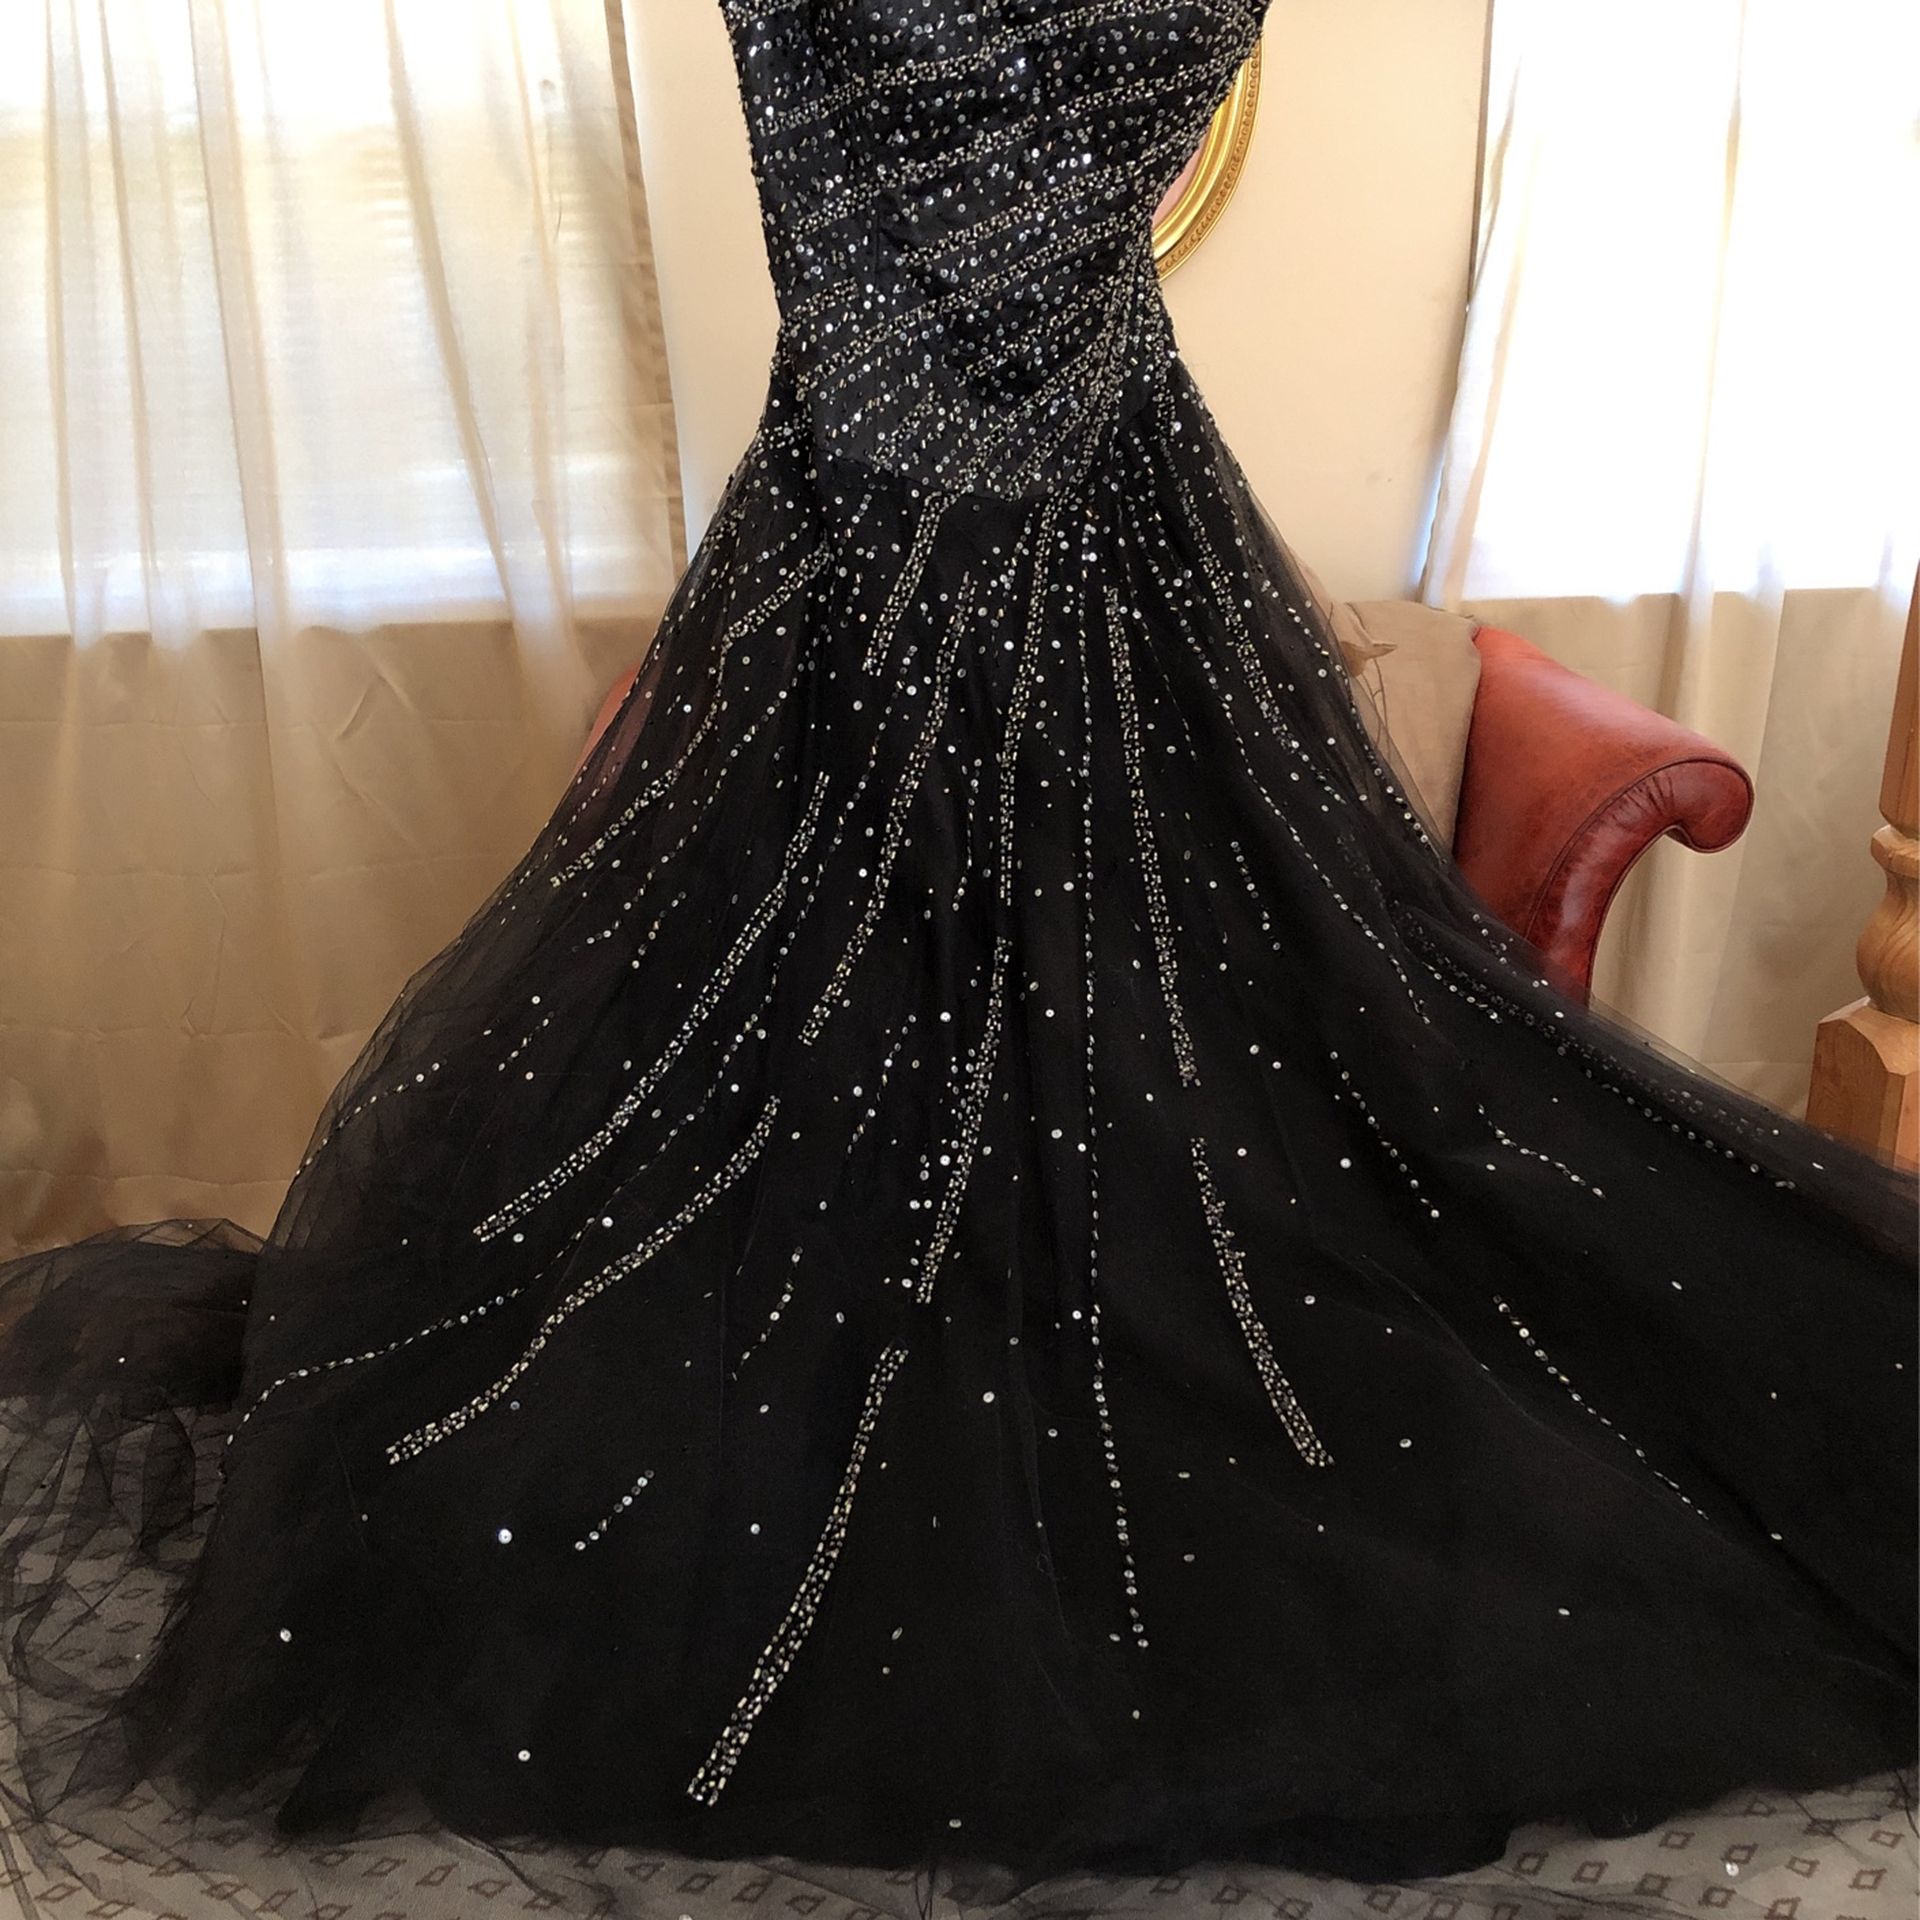 Black & Silver Beaded Spaghetti Strapped Gown with Tuille & a Can Can slip